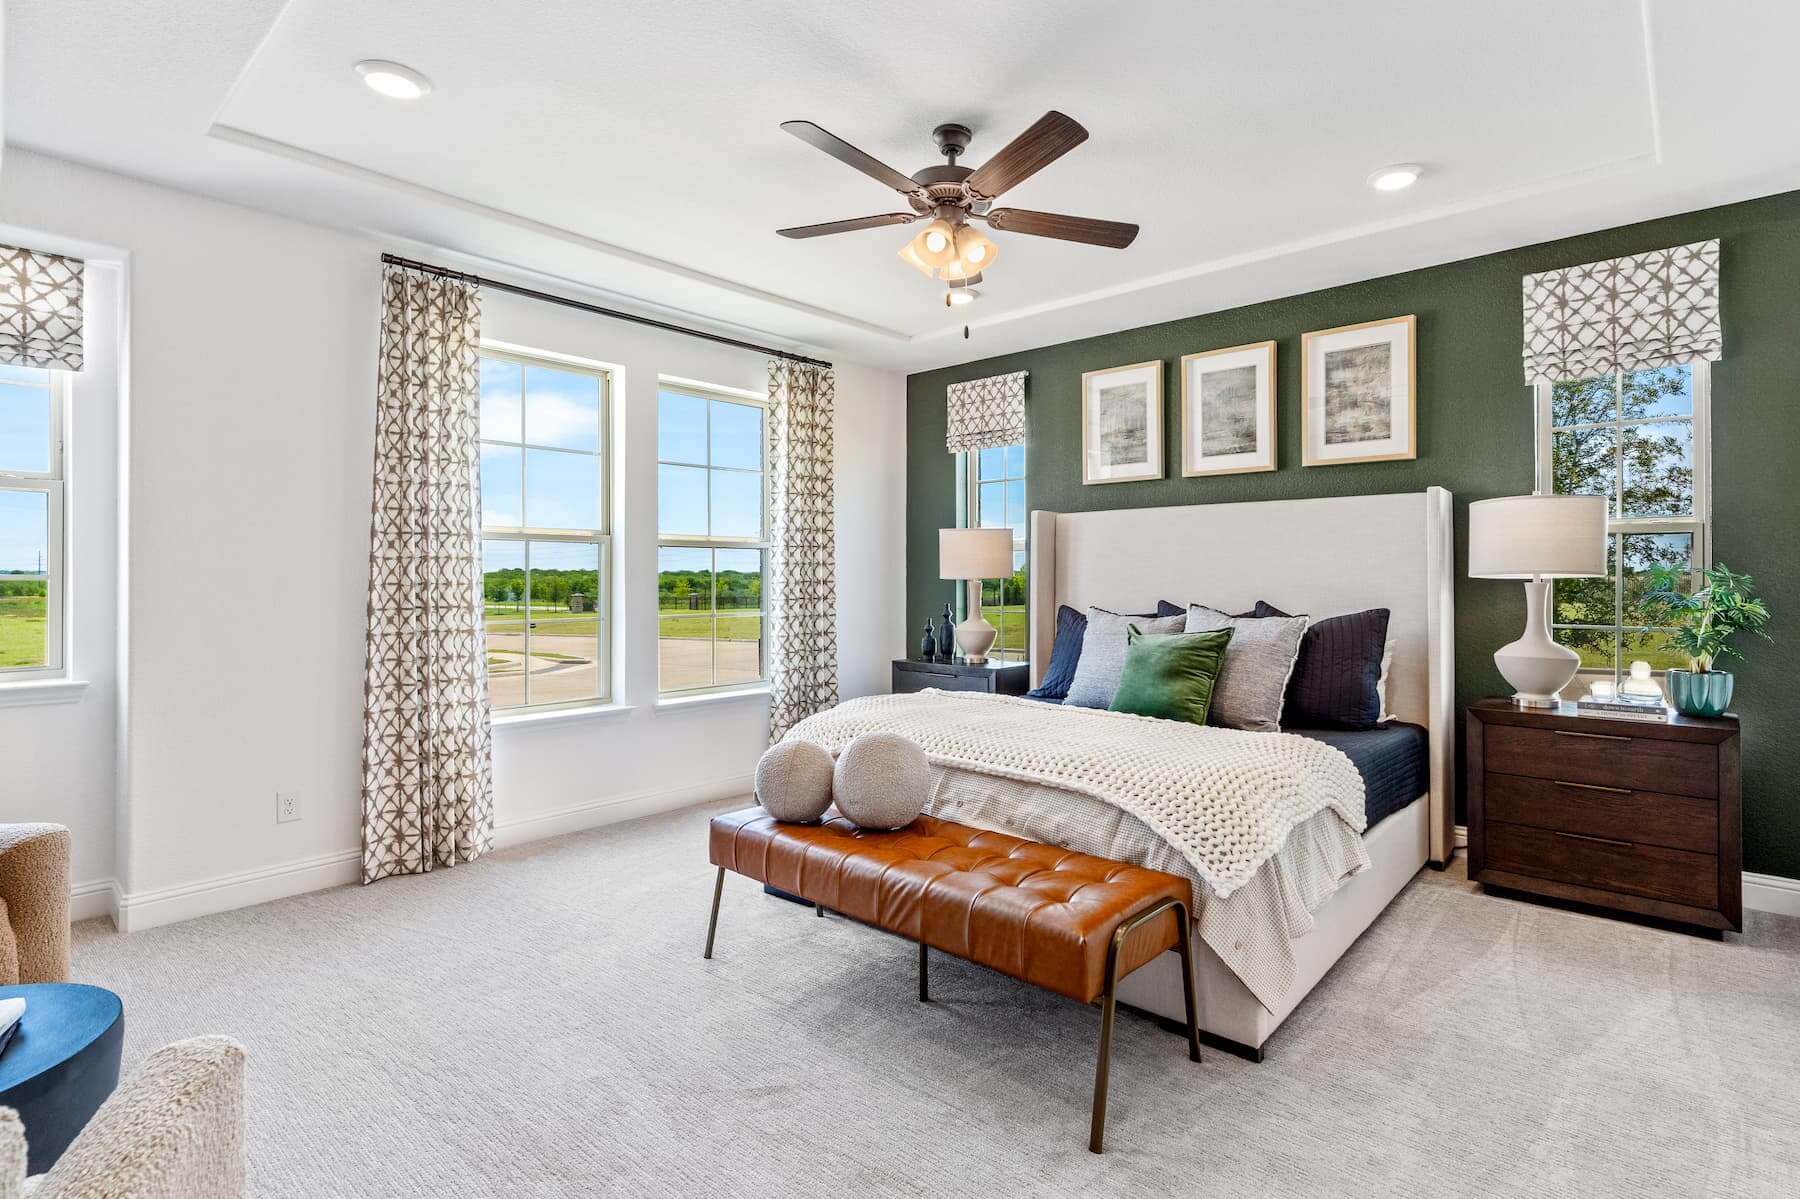 A modern bedroom in new homes in Mansfield TX with a green accent wall, white furnishings, and a ceiling fan.